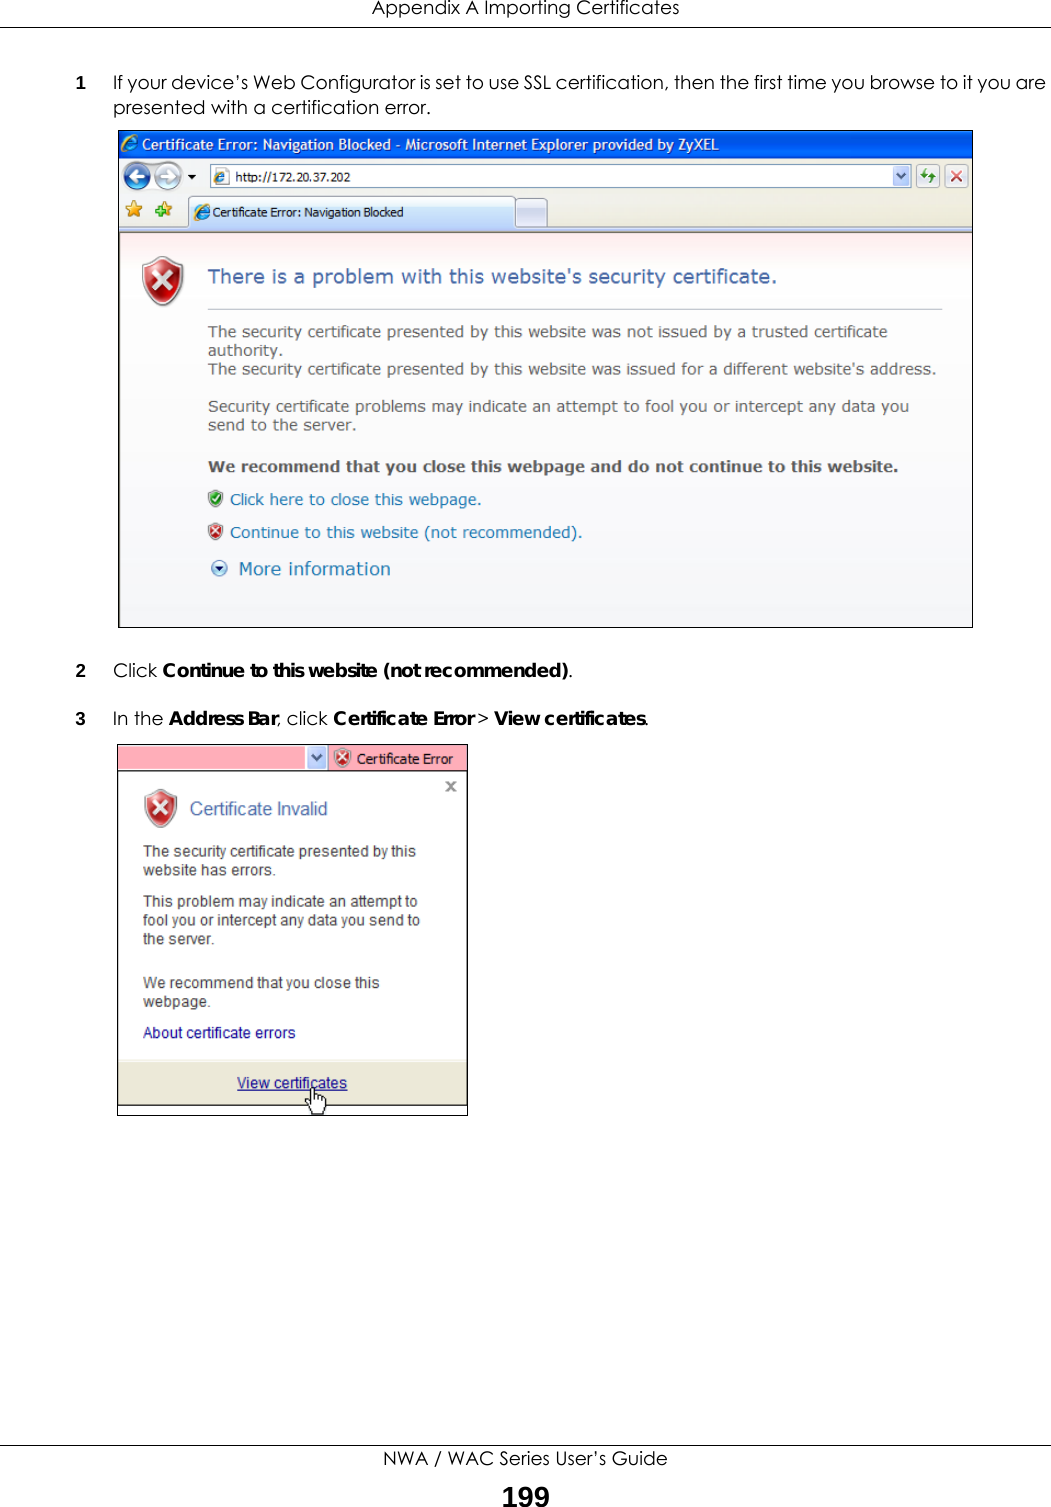 Appendix A Importing CertificatesNWA / WAC Series User’s Guide1991If your device’s Web Configurator is set to use SSL certification, then the first time you browse to it you are presented with a certification error.2Click Continue to this website (not recommended).3In the Address Bar, click Certificate Error &gt; View certificates.